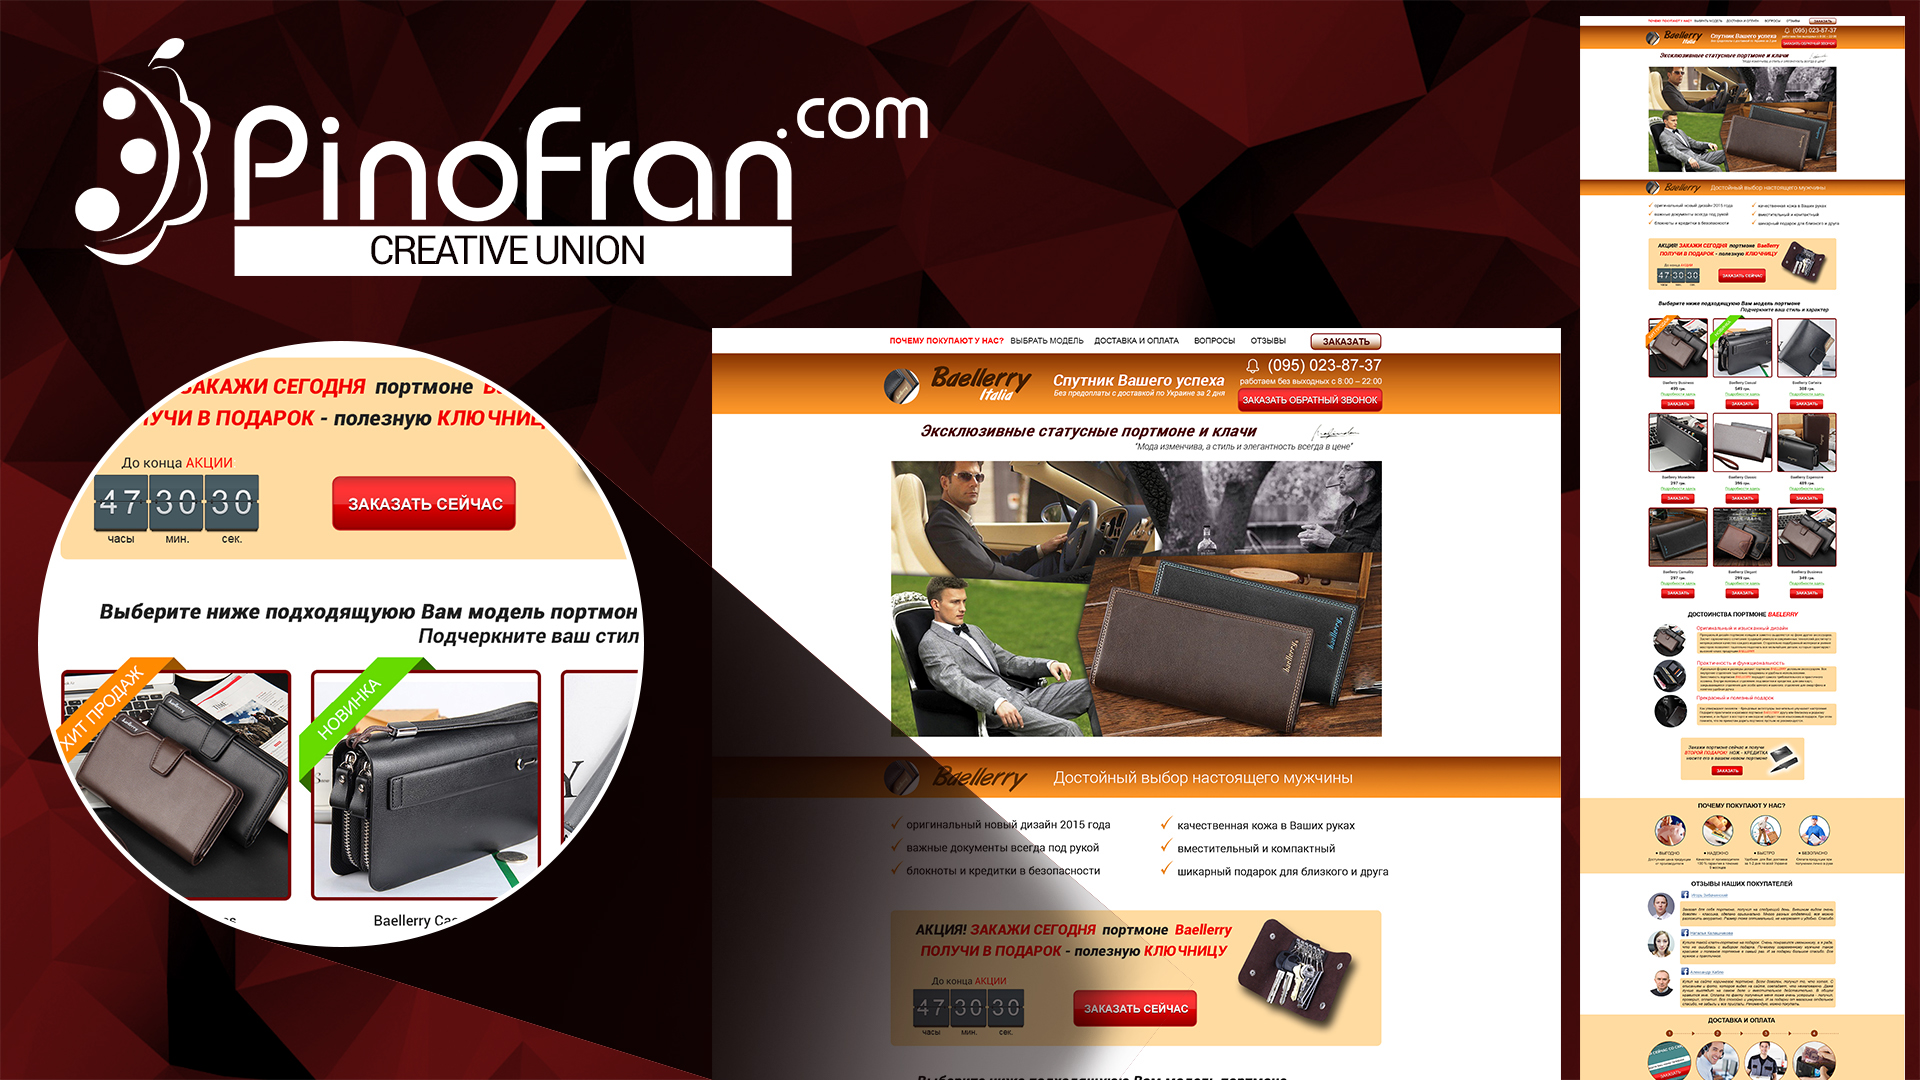 Probably, you look for in whom to order professional development of the beautiful spacious site? PinoFran.com directly here! During the existence the company created design for uncountable quantity of the sites and for the whole sea of various printing products, constantly holding a level of the high quality standard. Look, what "volume" designers of PinoFran.com when using right effects on usual two-dimensional pictures can make the model, visually creating depth and multiple layers. Too to receive design under your taste, simply specify the wishes at registration of the order through www.pinofran.com.